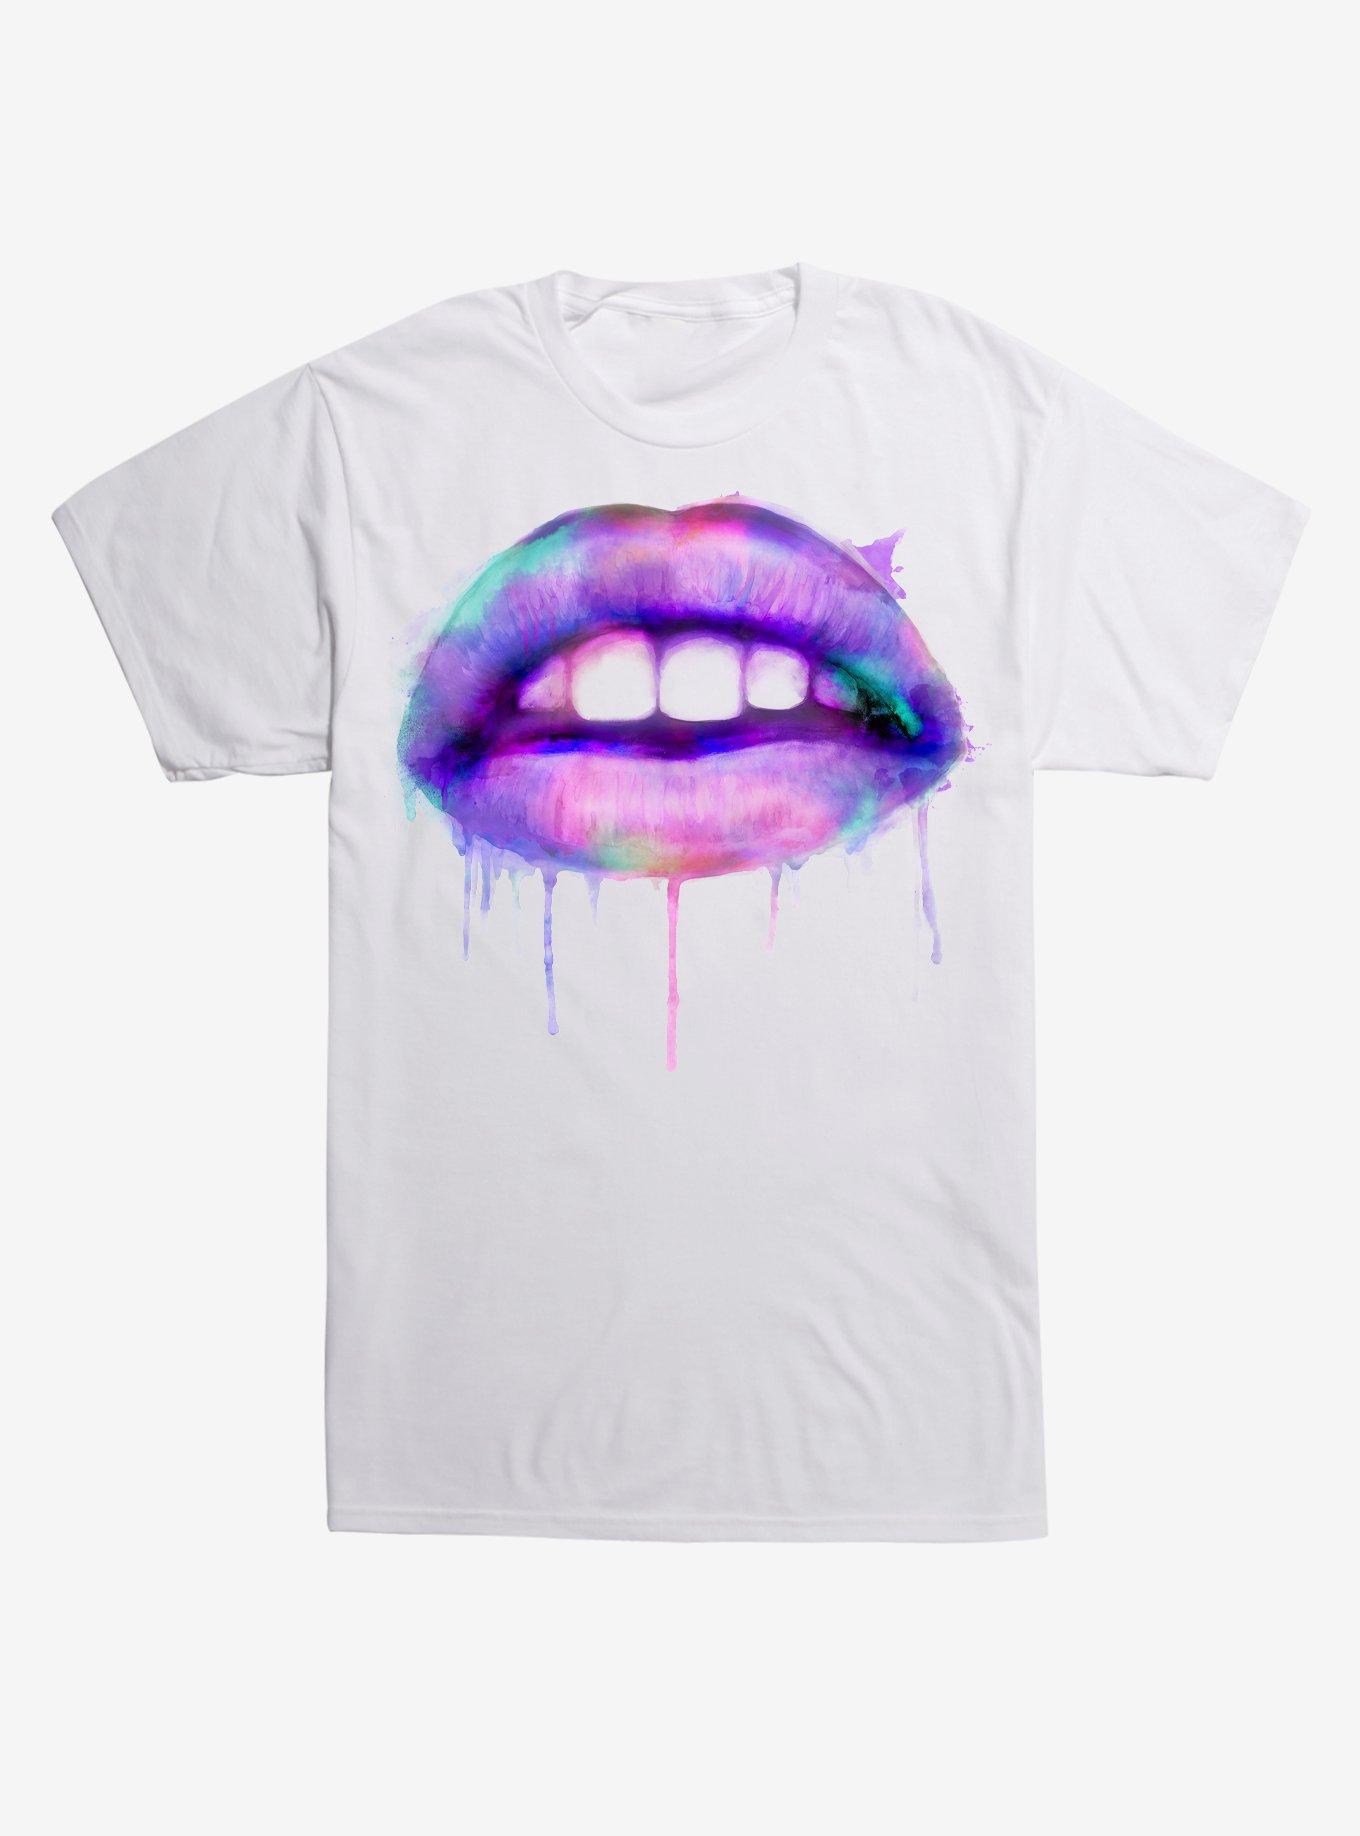 Dripping Paint Lips T-Shirt, WHITE, hi-res